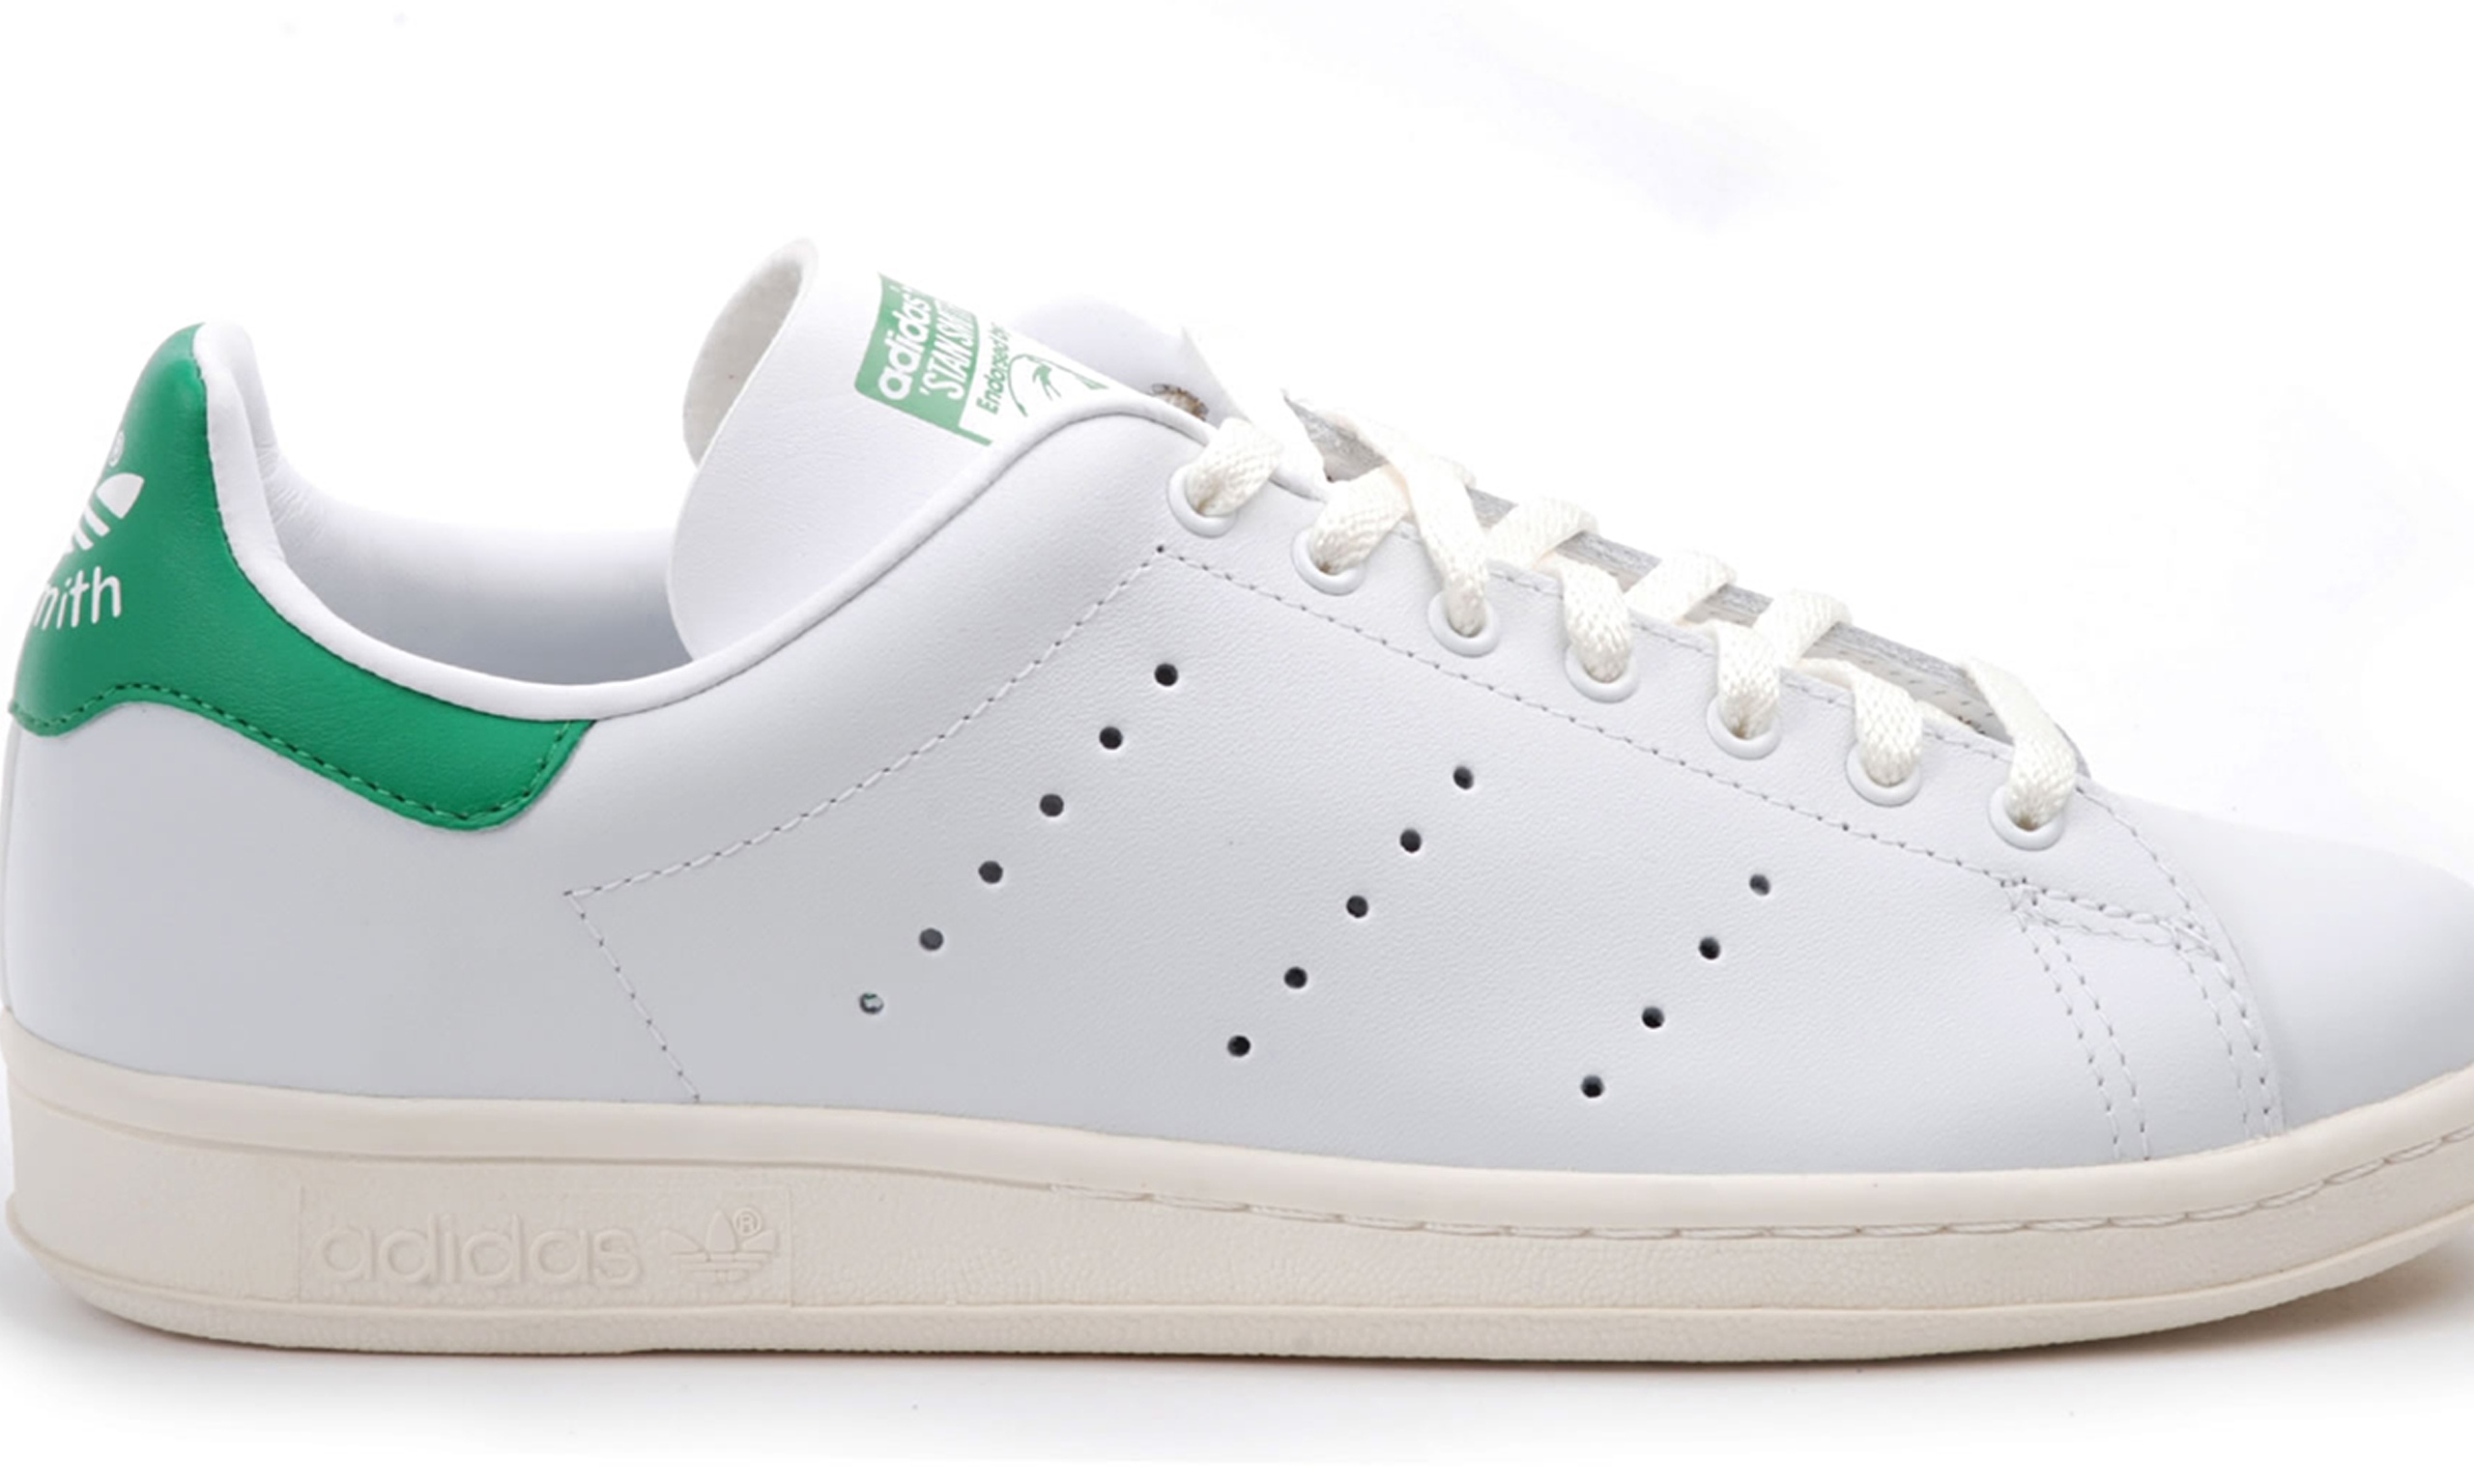 Stan Smith (the tennis player) returns to promote Stan Smith (the shoe ...